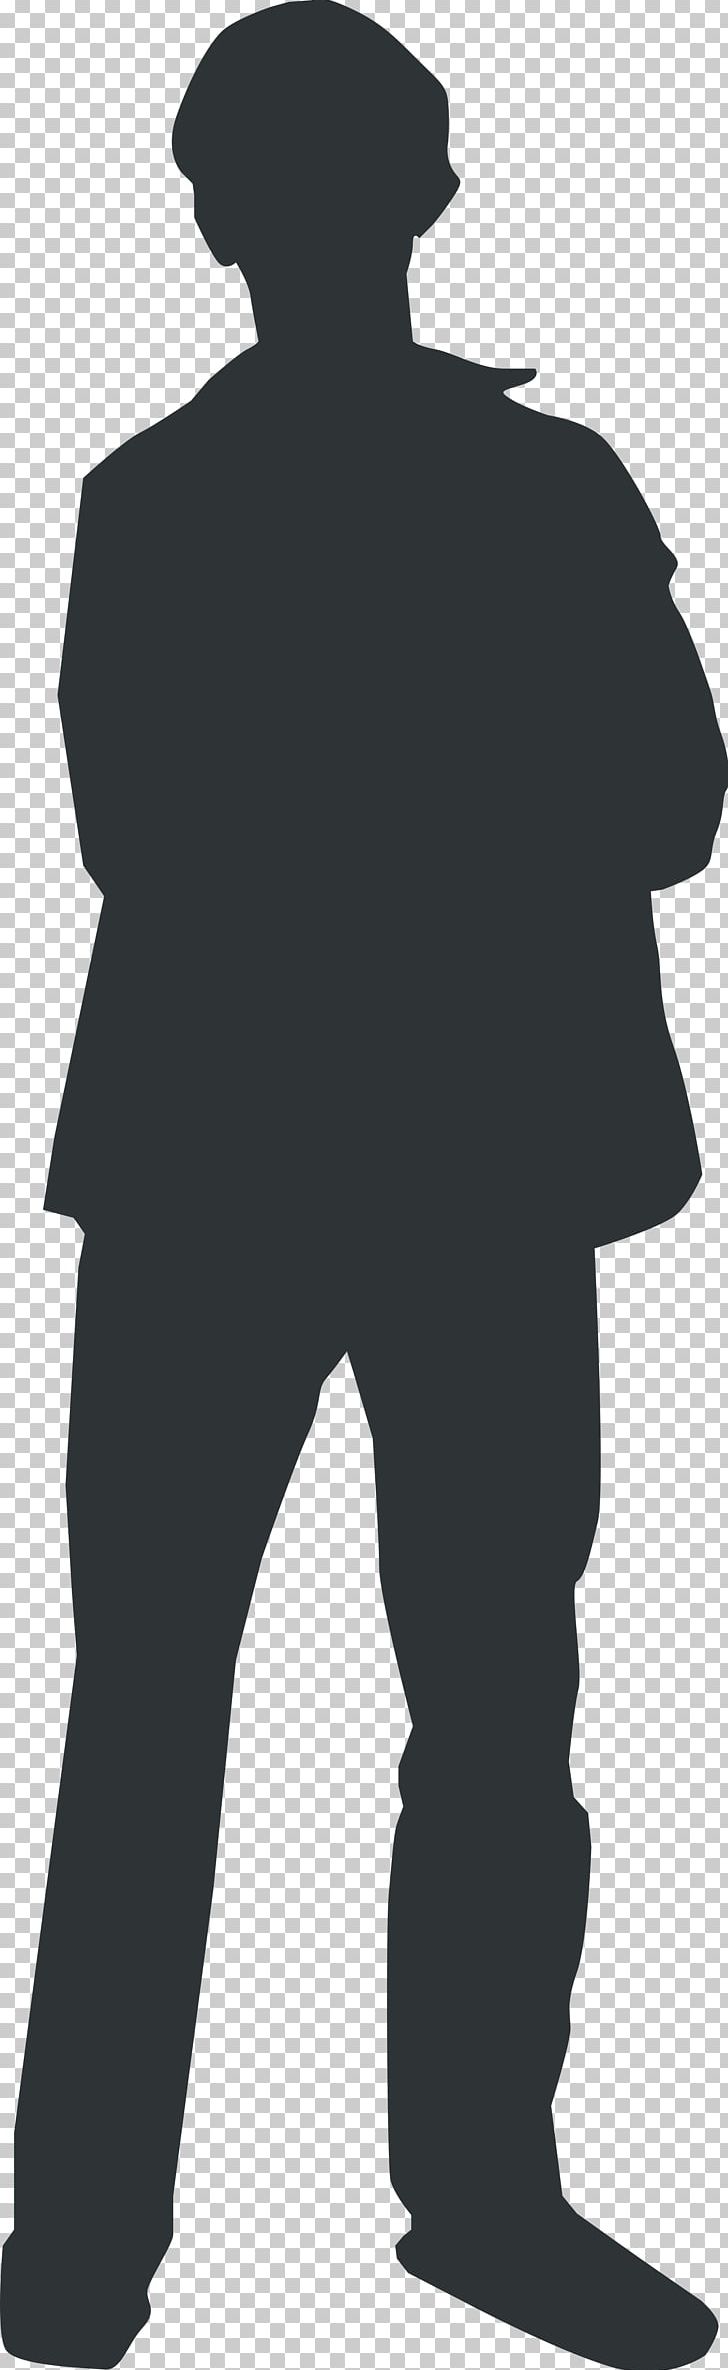 Person Outline Homo Sapiens PNG, Clipart, Angle, Black, Black And White ...